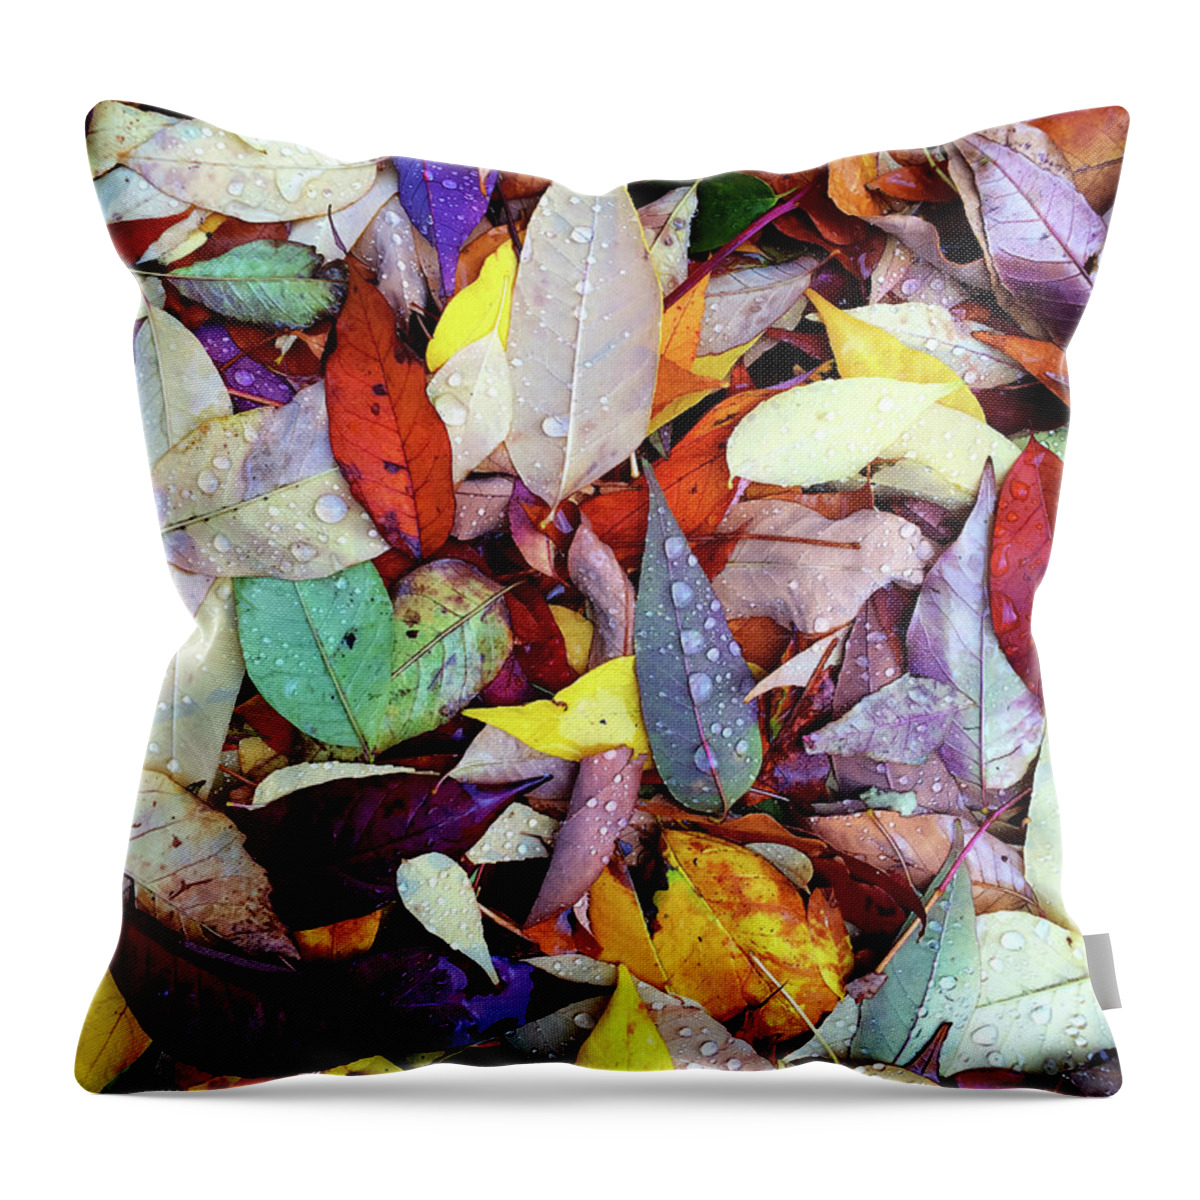 Autumn Throw Pillow featuring the photograph Colorful autumn leaves in raindrops by GoodMood Art